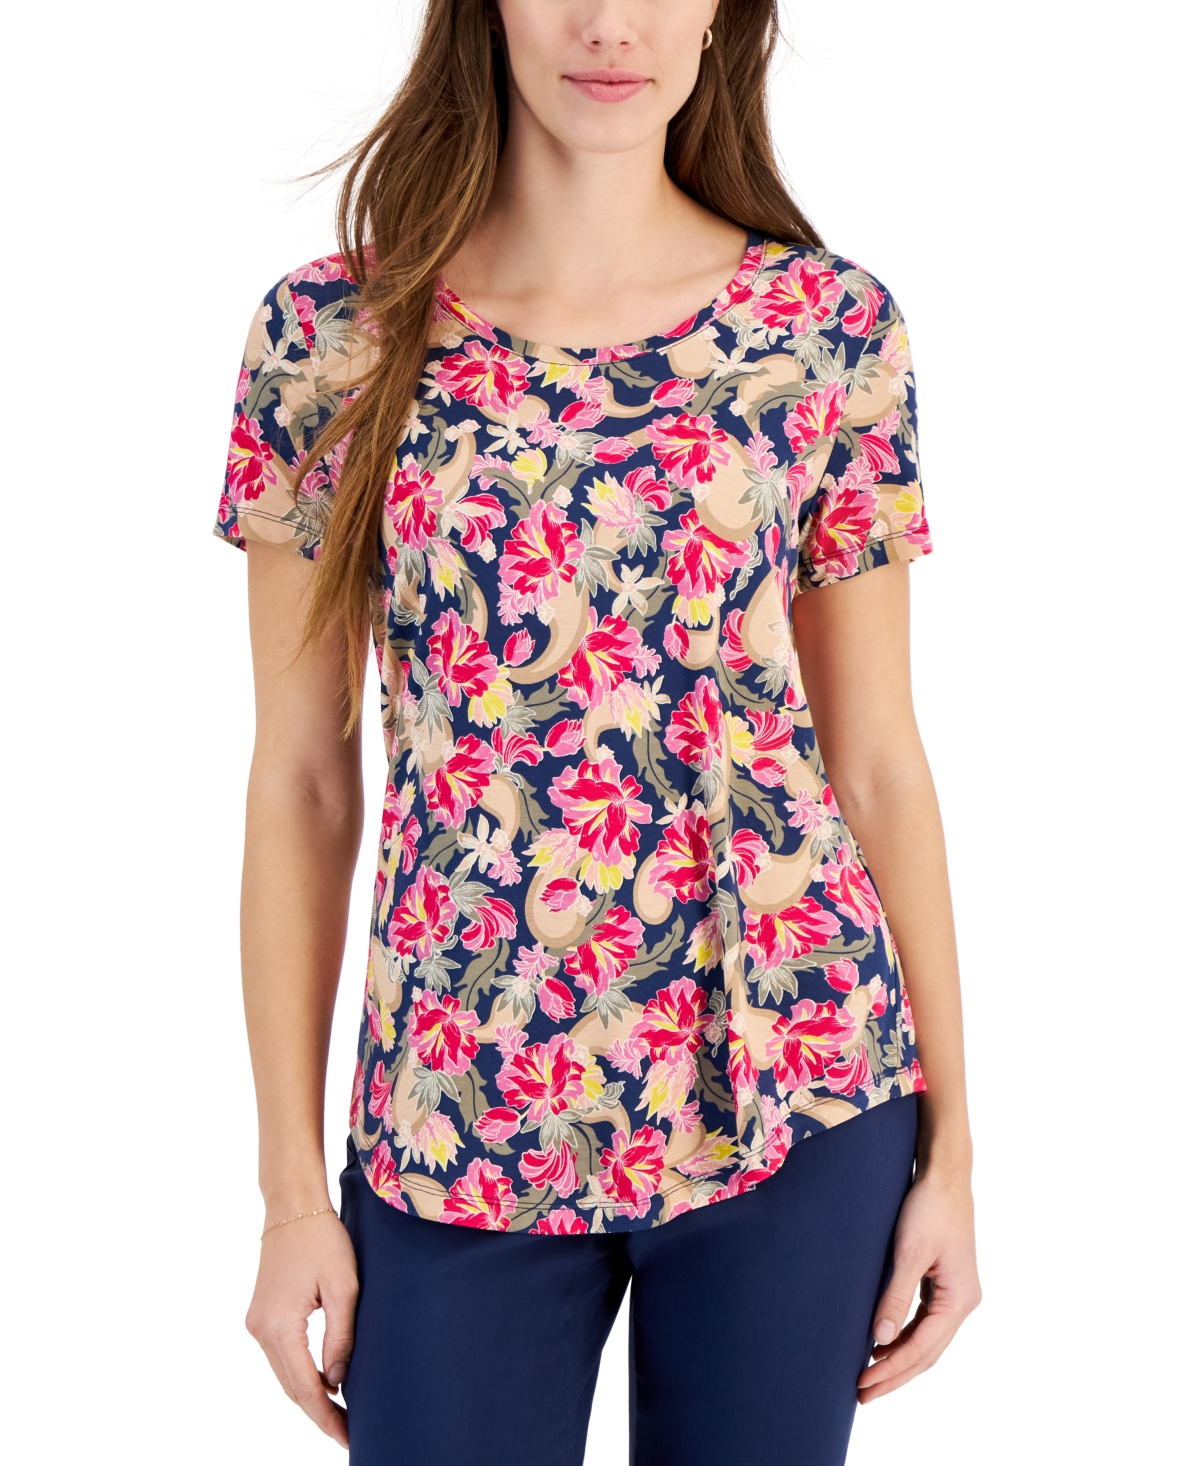 Women's Printed Short Sleeve Scoop-neck Top, Created for Macy's - Navy Pink Floral